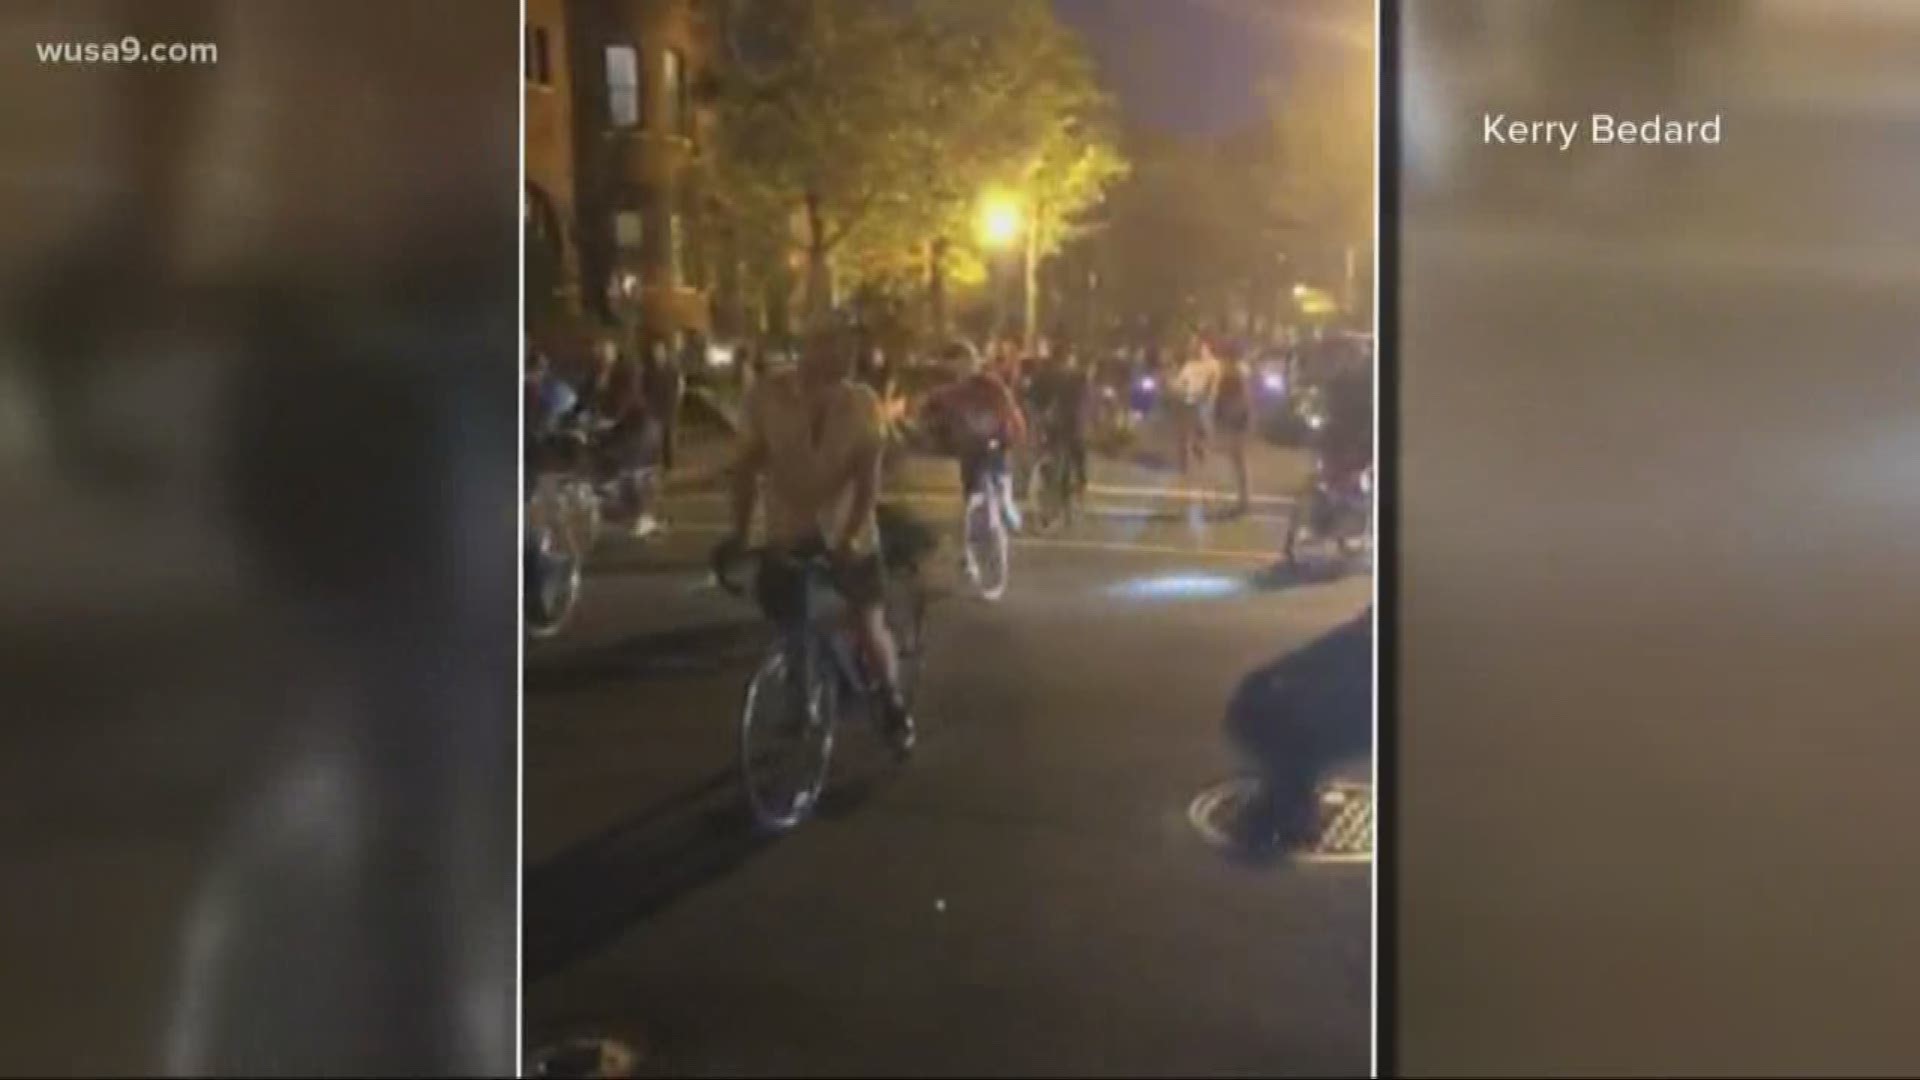 A DC woman recorded video of dozens of people on bikes riding through Dupont Circle.